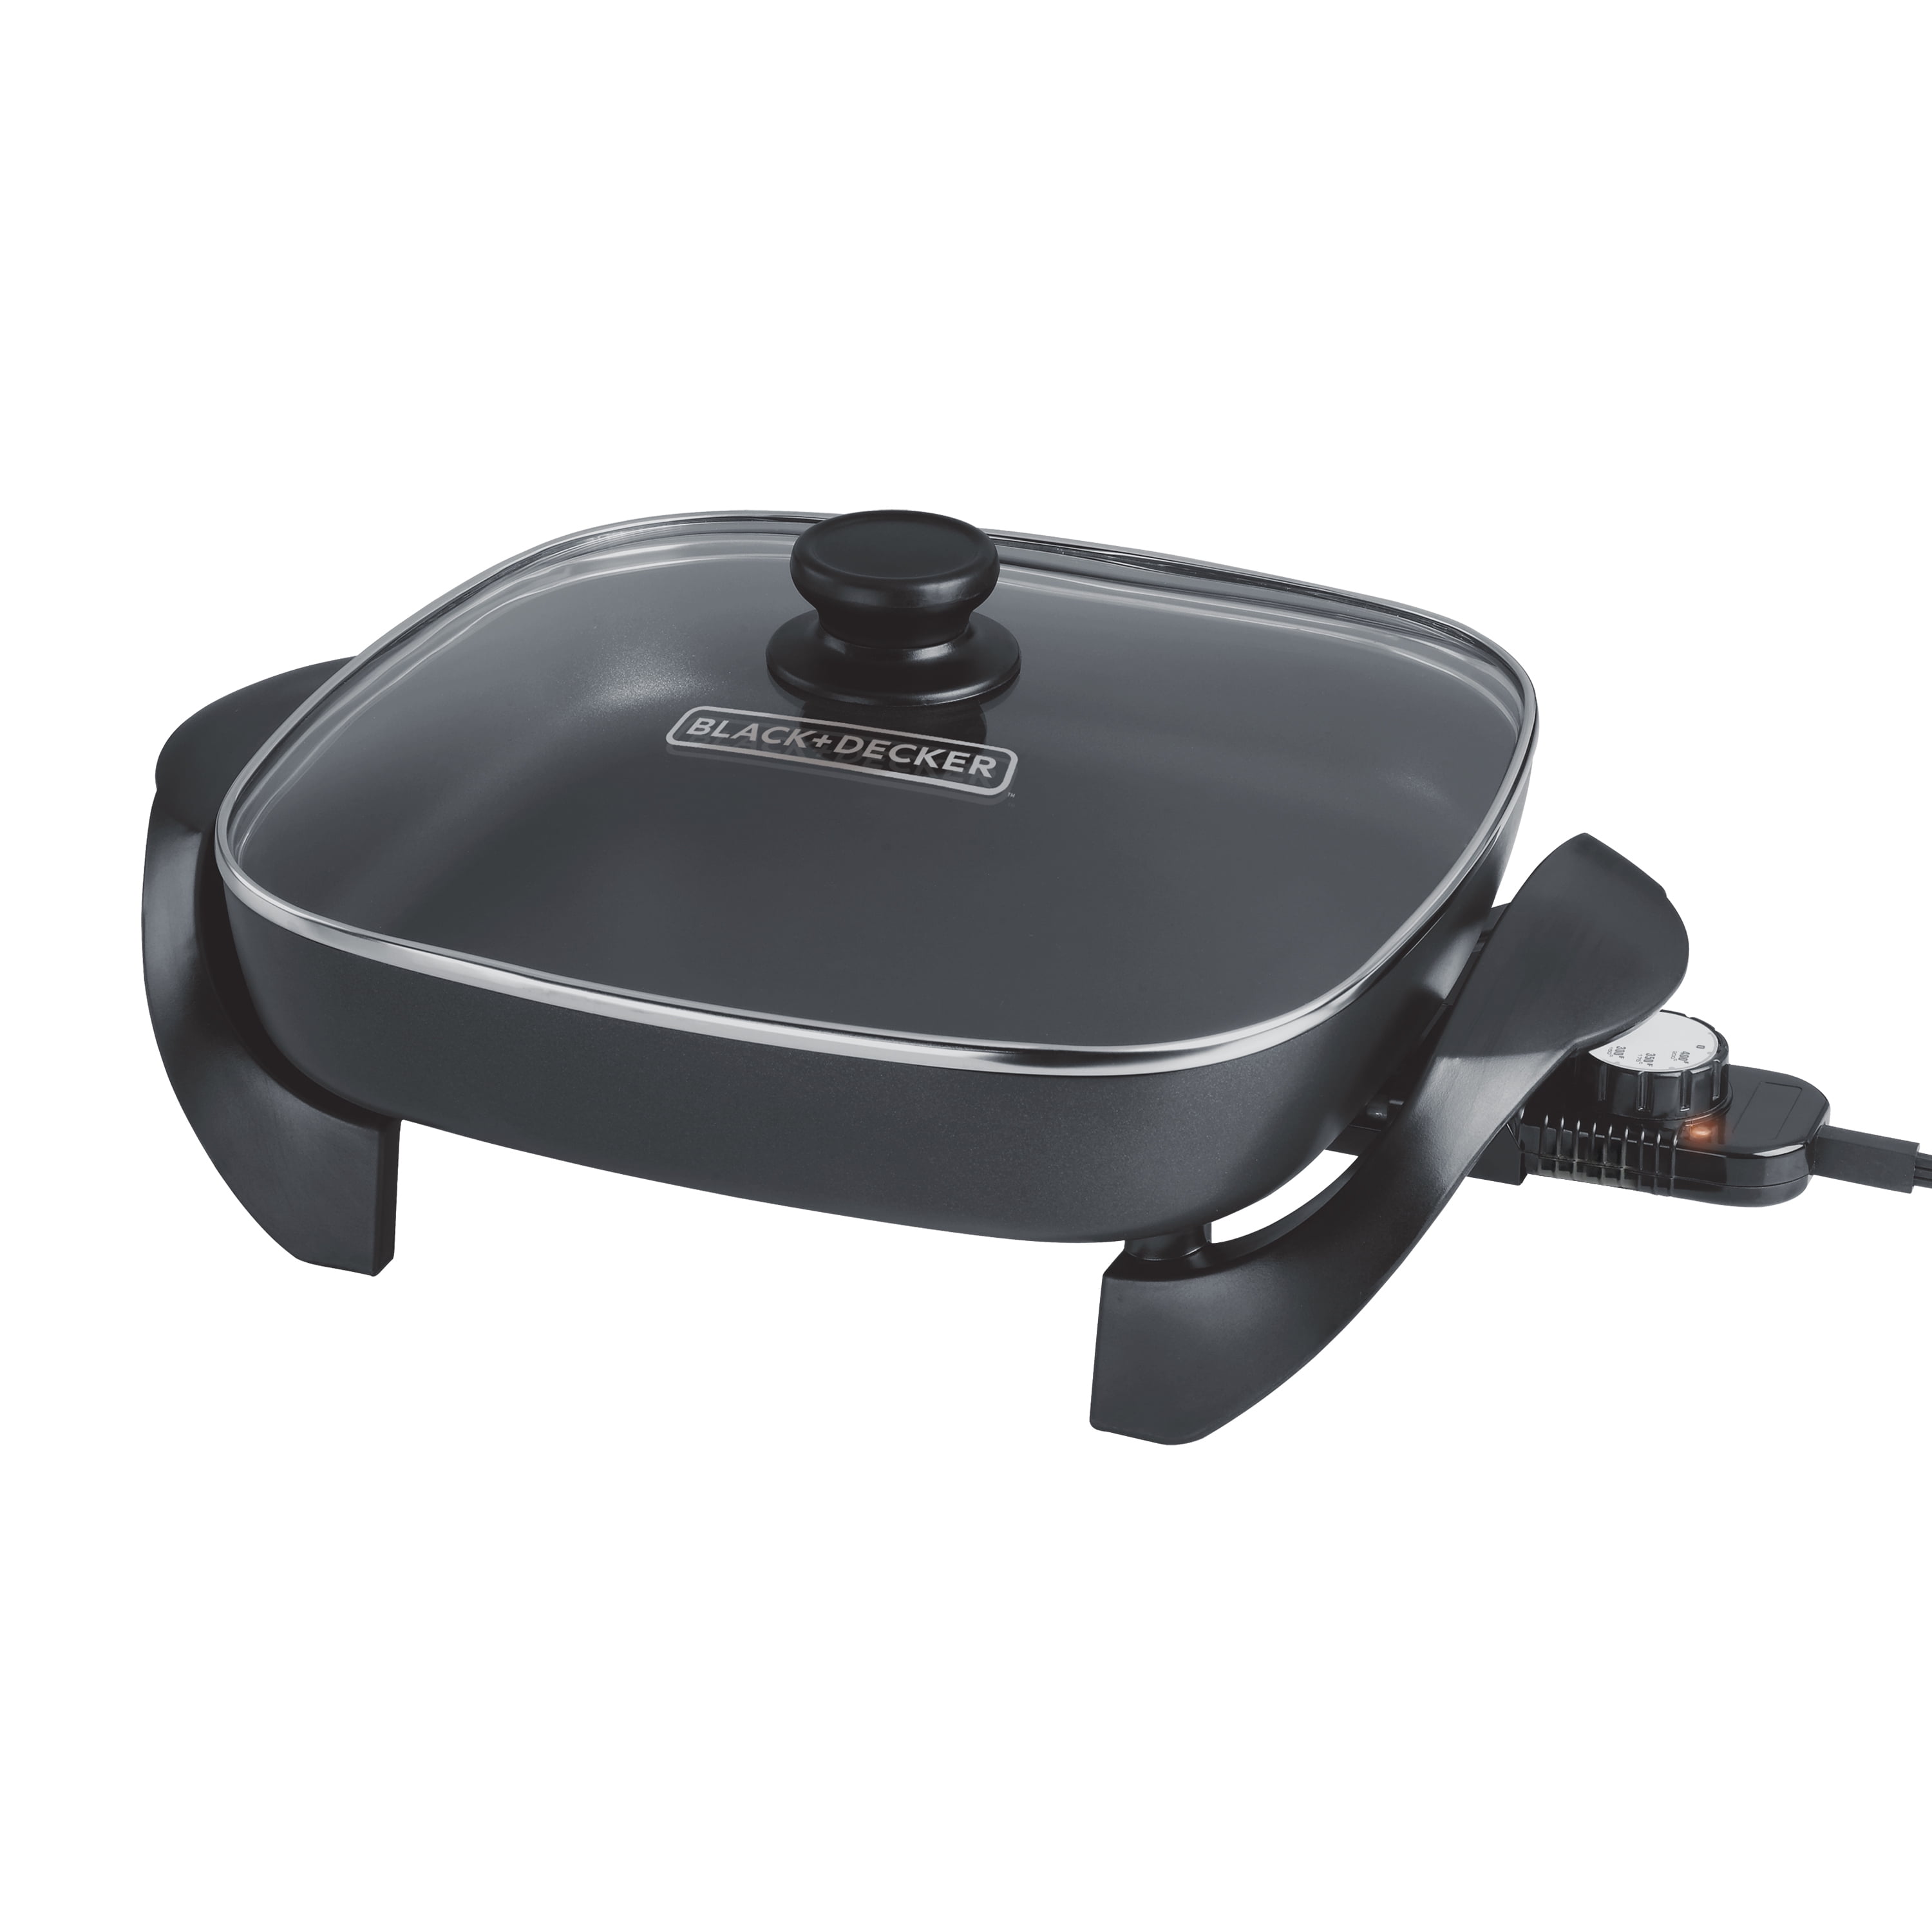 Black & Decker 12 Inch Electric Skillet with Glass Lid SK1212B